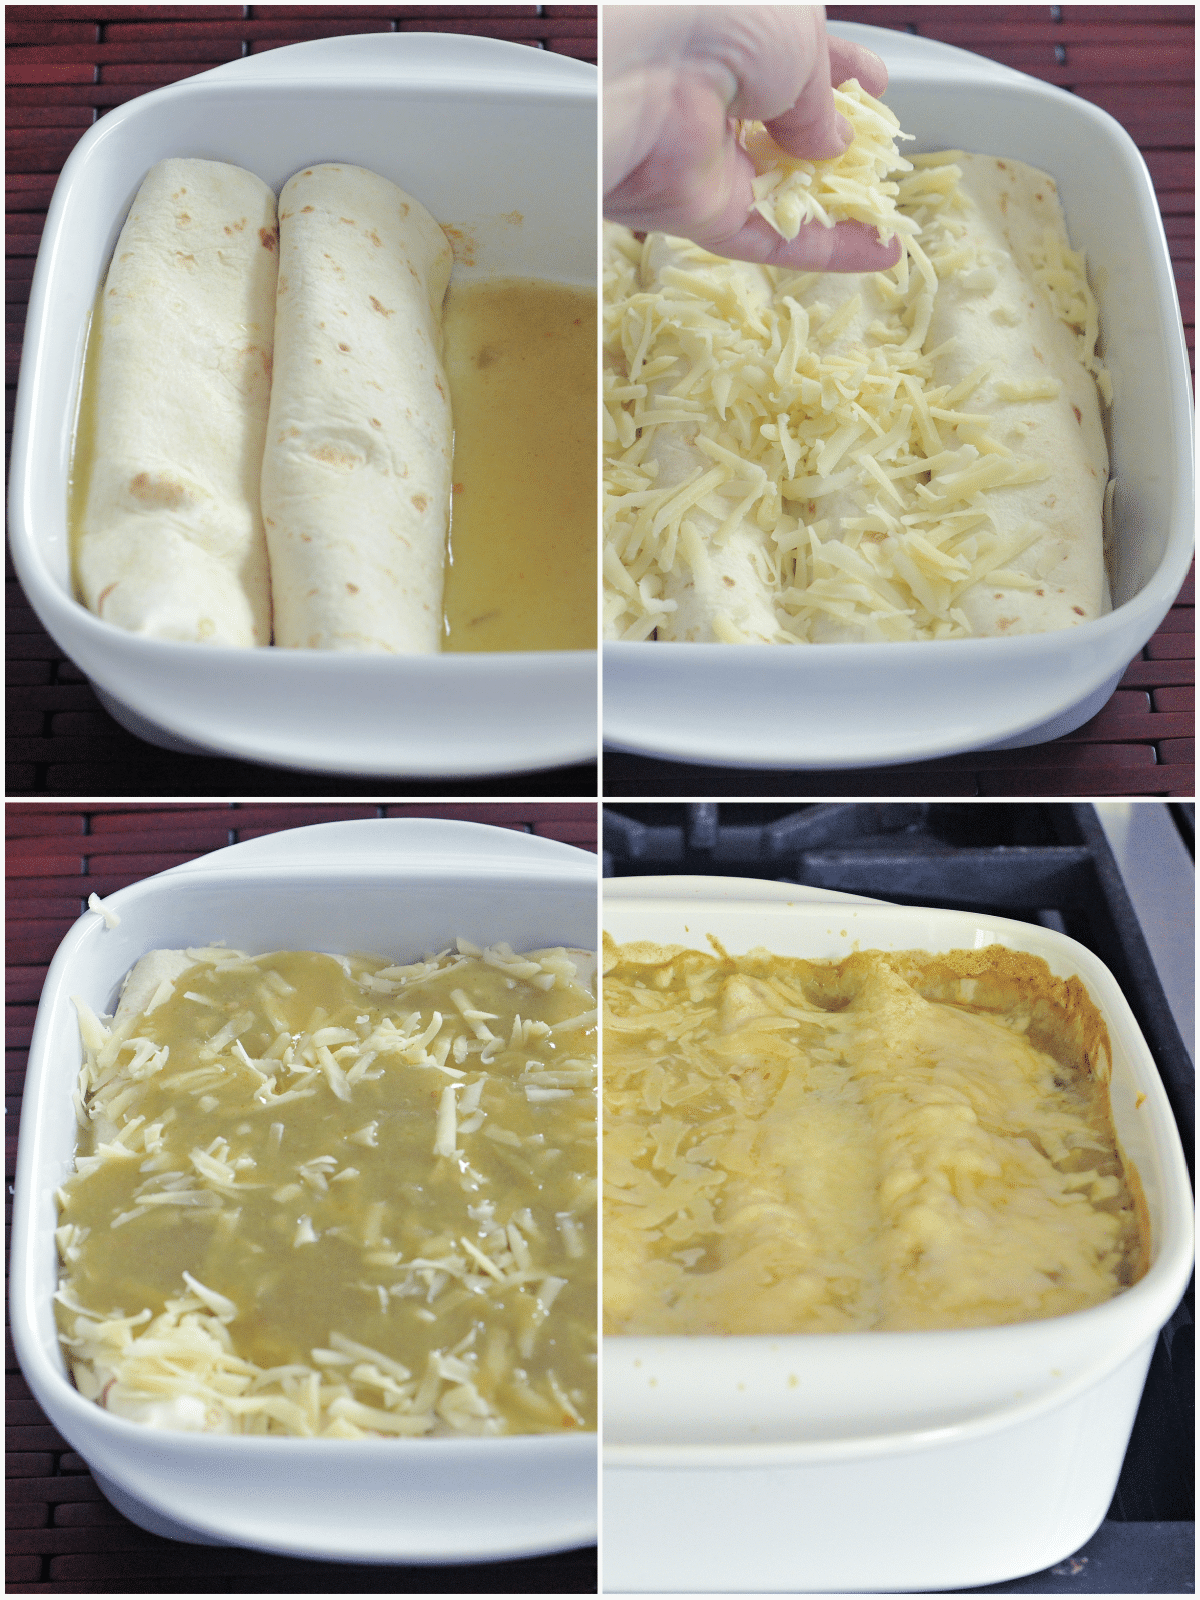 A four photo collage showing ow to make Hatch chile enchiladas: add green sauce to bottom of baking dish, add rolled up enchiladas, add grated cheese on top, add more green enchilada sauce, and bake.